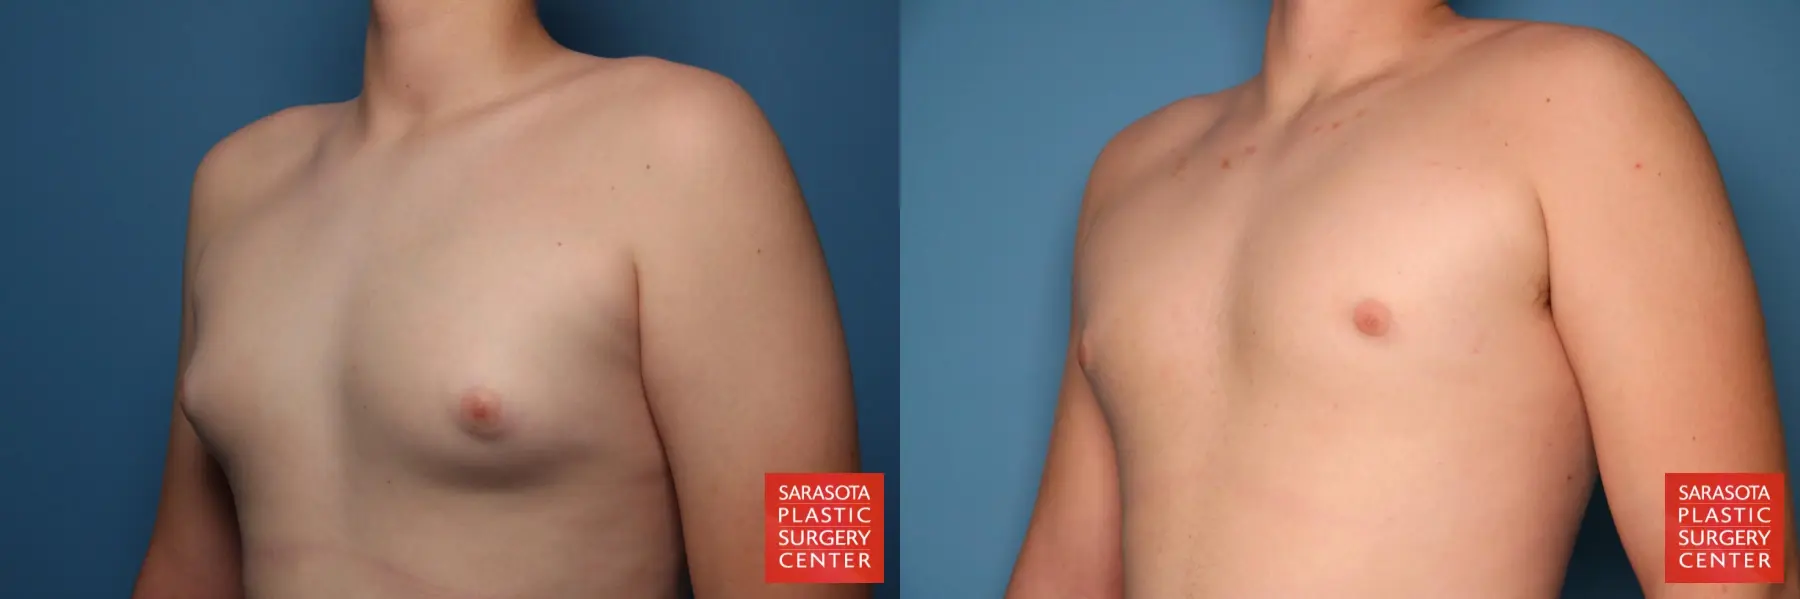 Gynecomastia: Patient 4 - Before and After 2